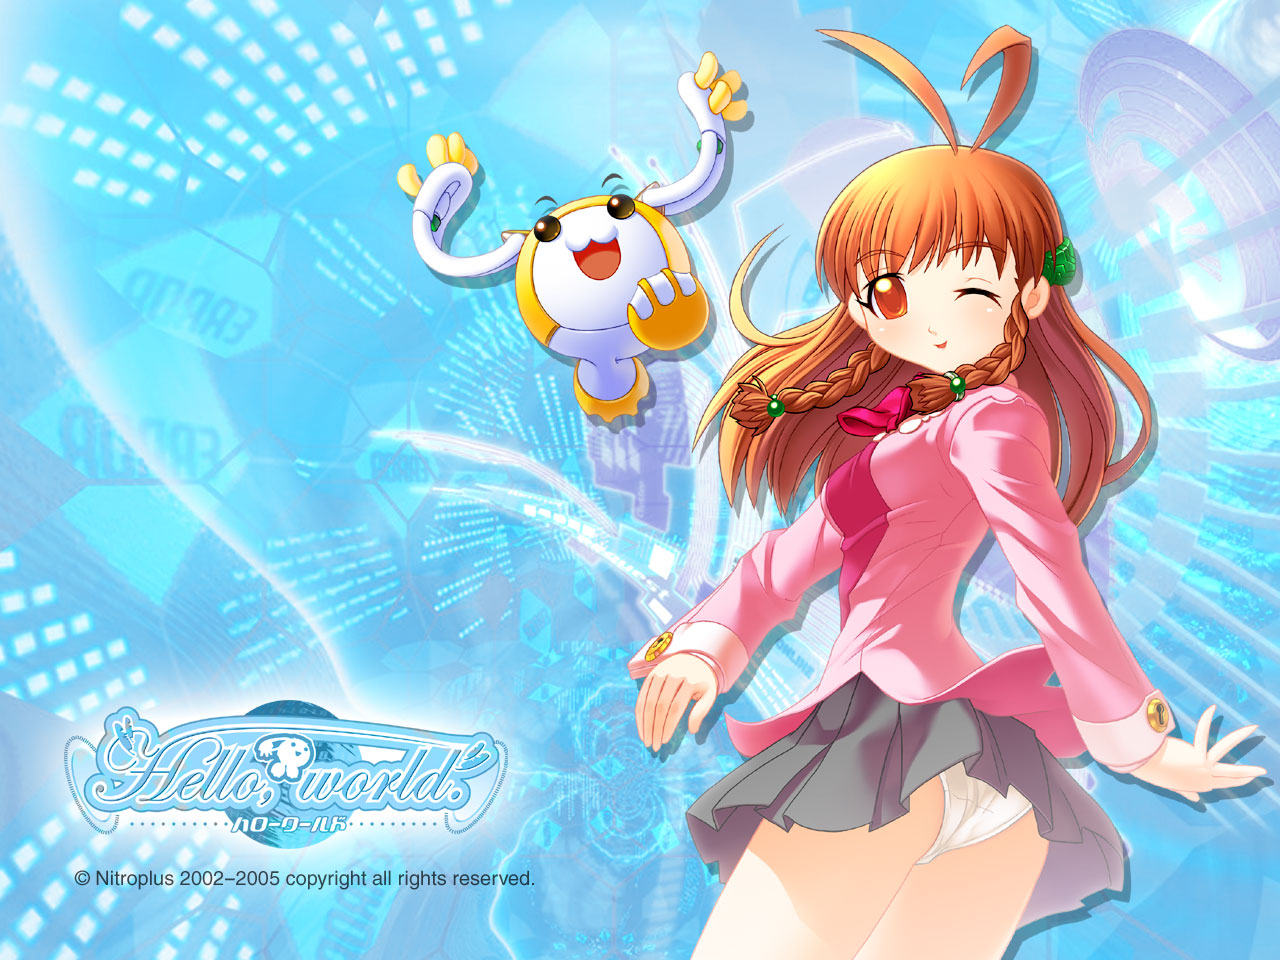 Natsumi Aibara screenshots, images and pictures - Giant Bomb